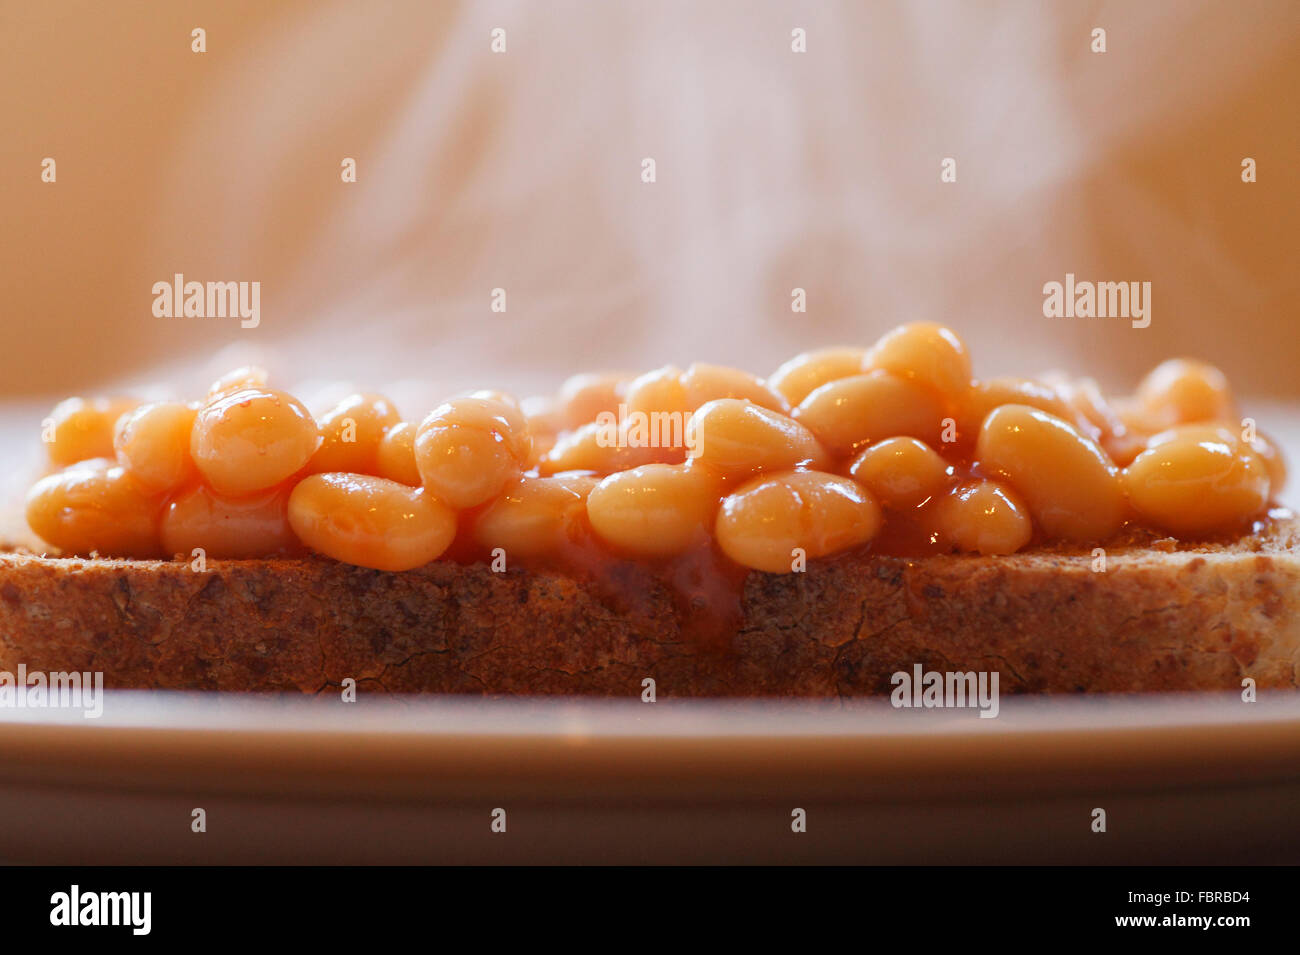 Baked beans on toast with steam rising. Stock Photo